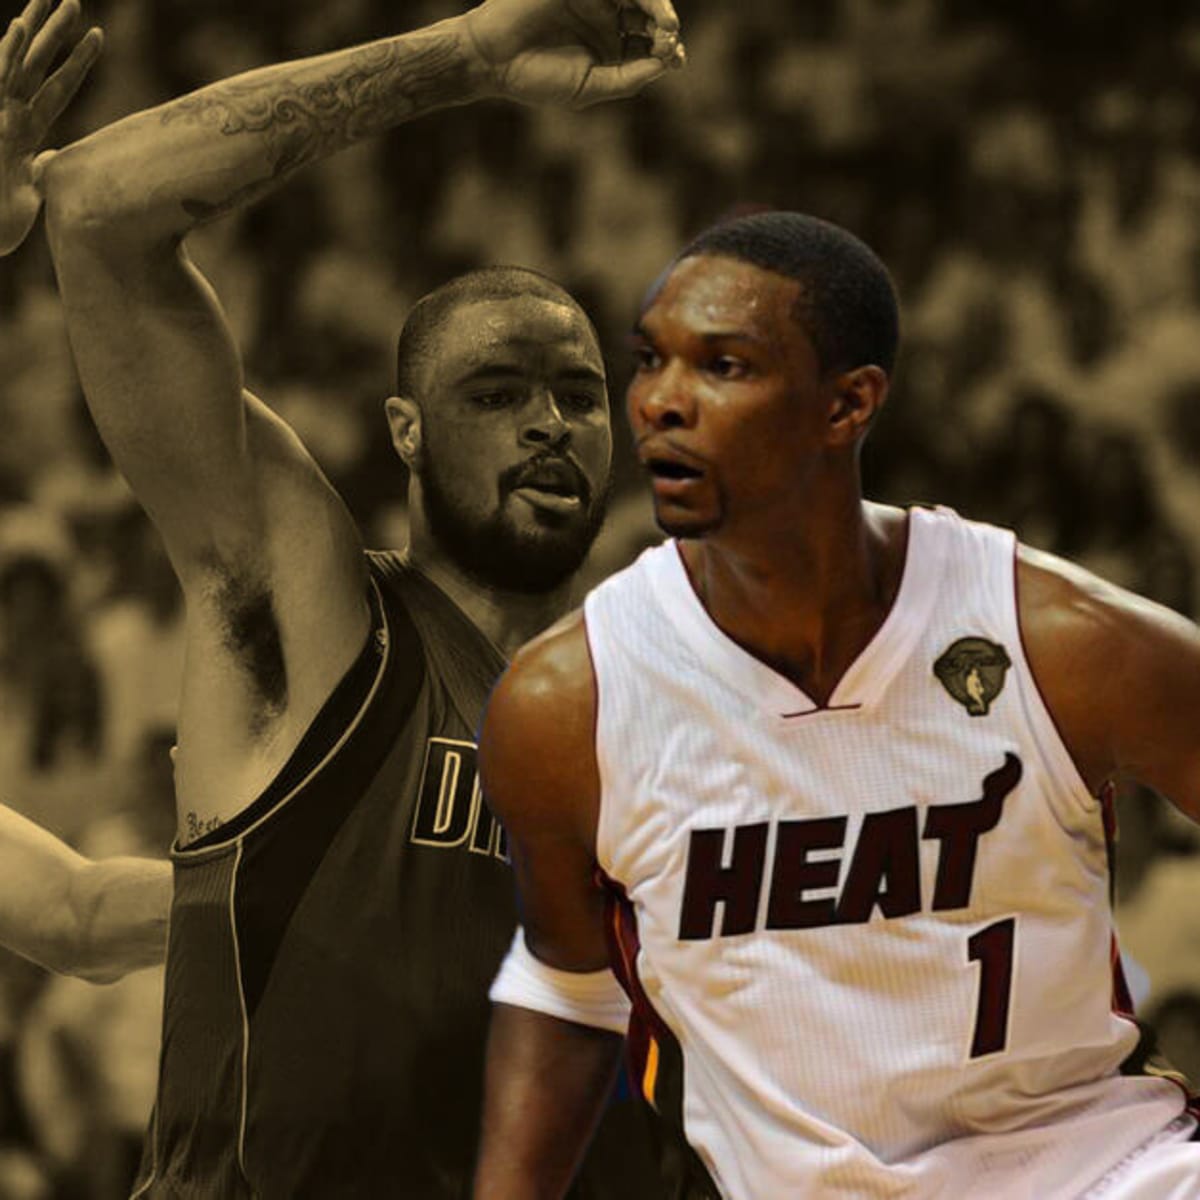 Commentary: This Bosh-less Miami Heat team can't compare to shot-making  title winners of 2006